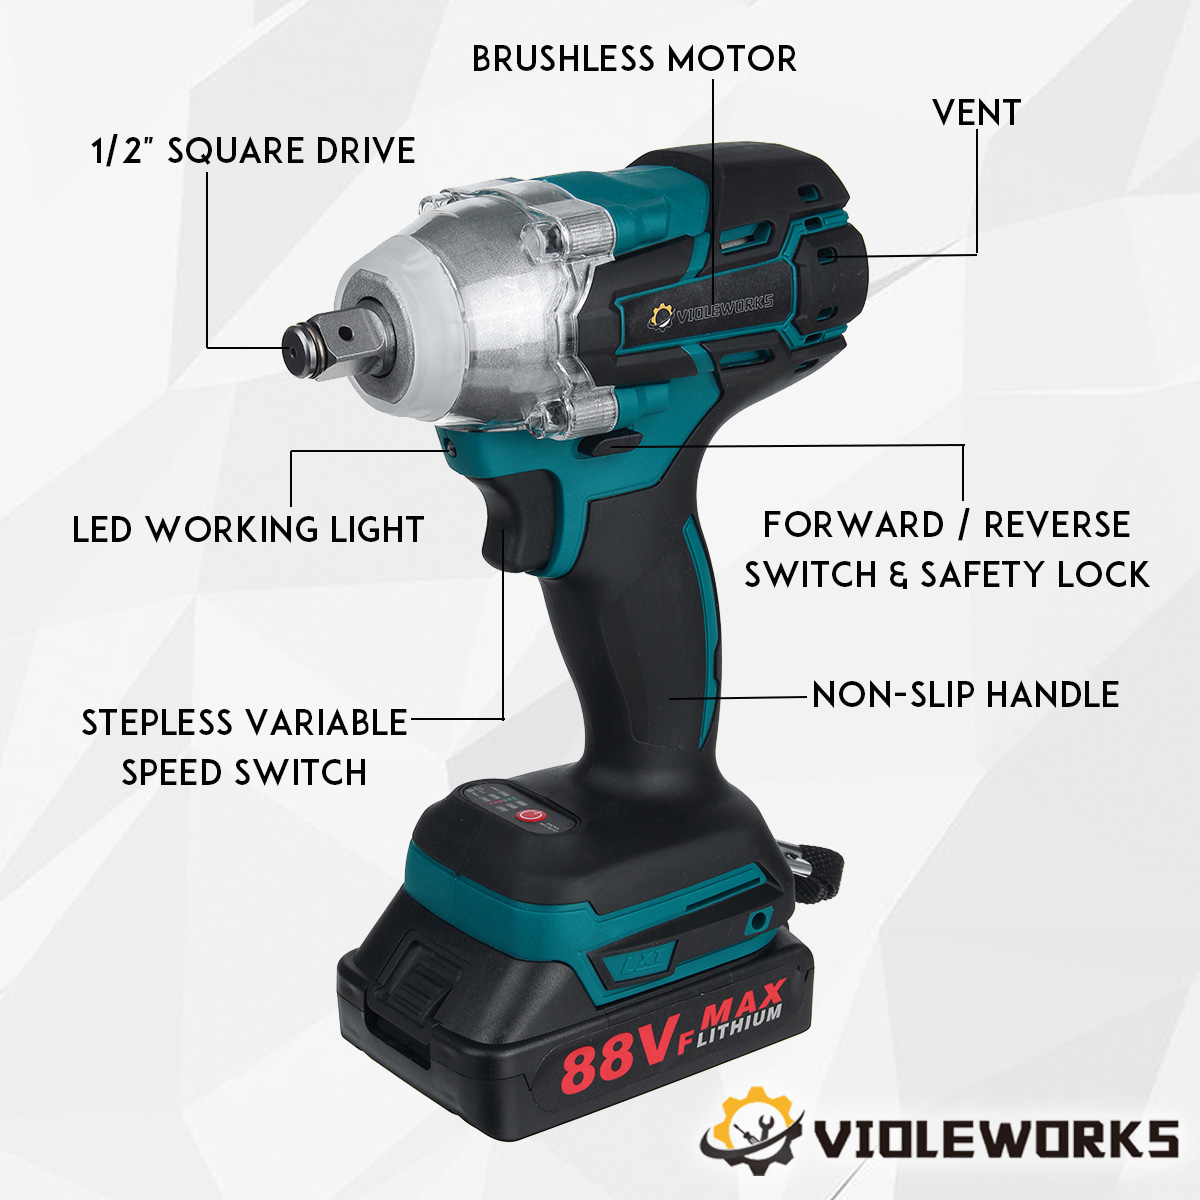 VIOLEWORKS-88VF-21V-280NM-1300mAh-Electric-Cordless-Impact-Wrench-Drill-Socket-W-1pc-or-2pcs-Battery-1791133-4